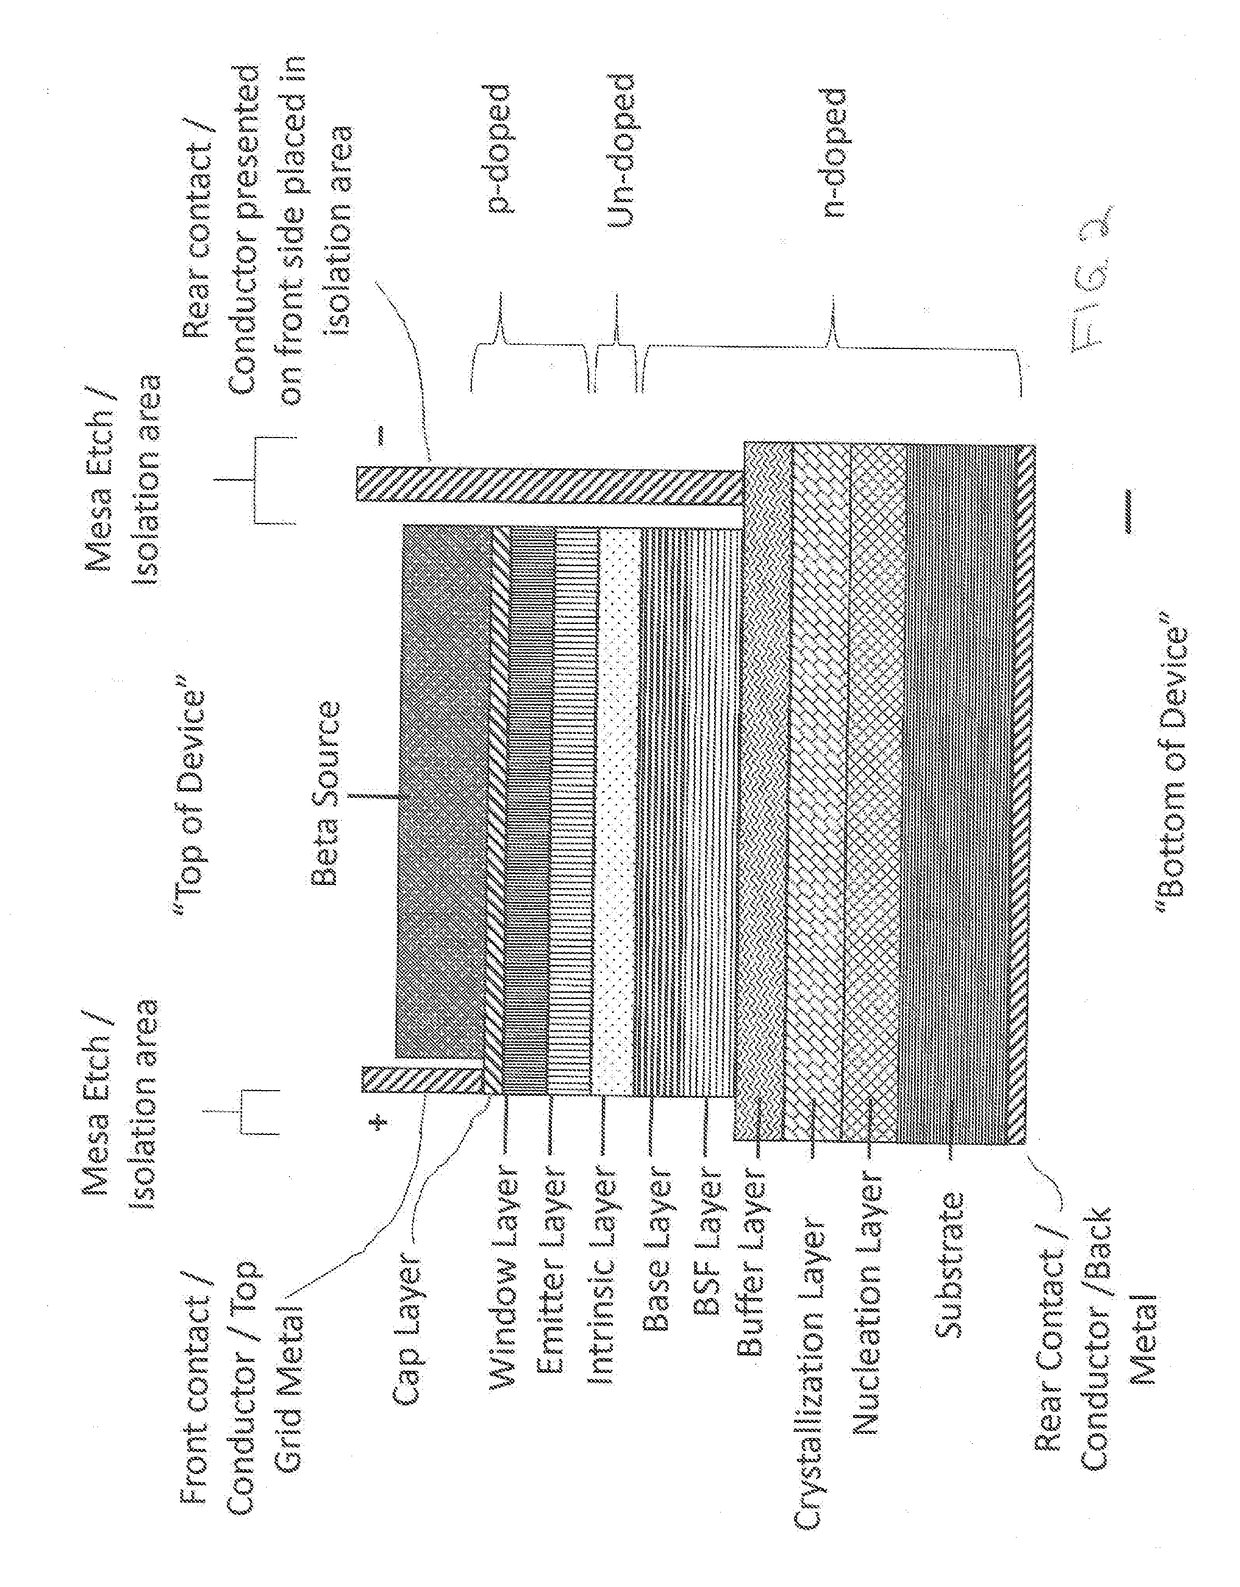 Series and/or Parallel Connected Alpha, Beta, and Gamma Voltaic Cell Devices